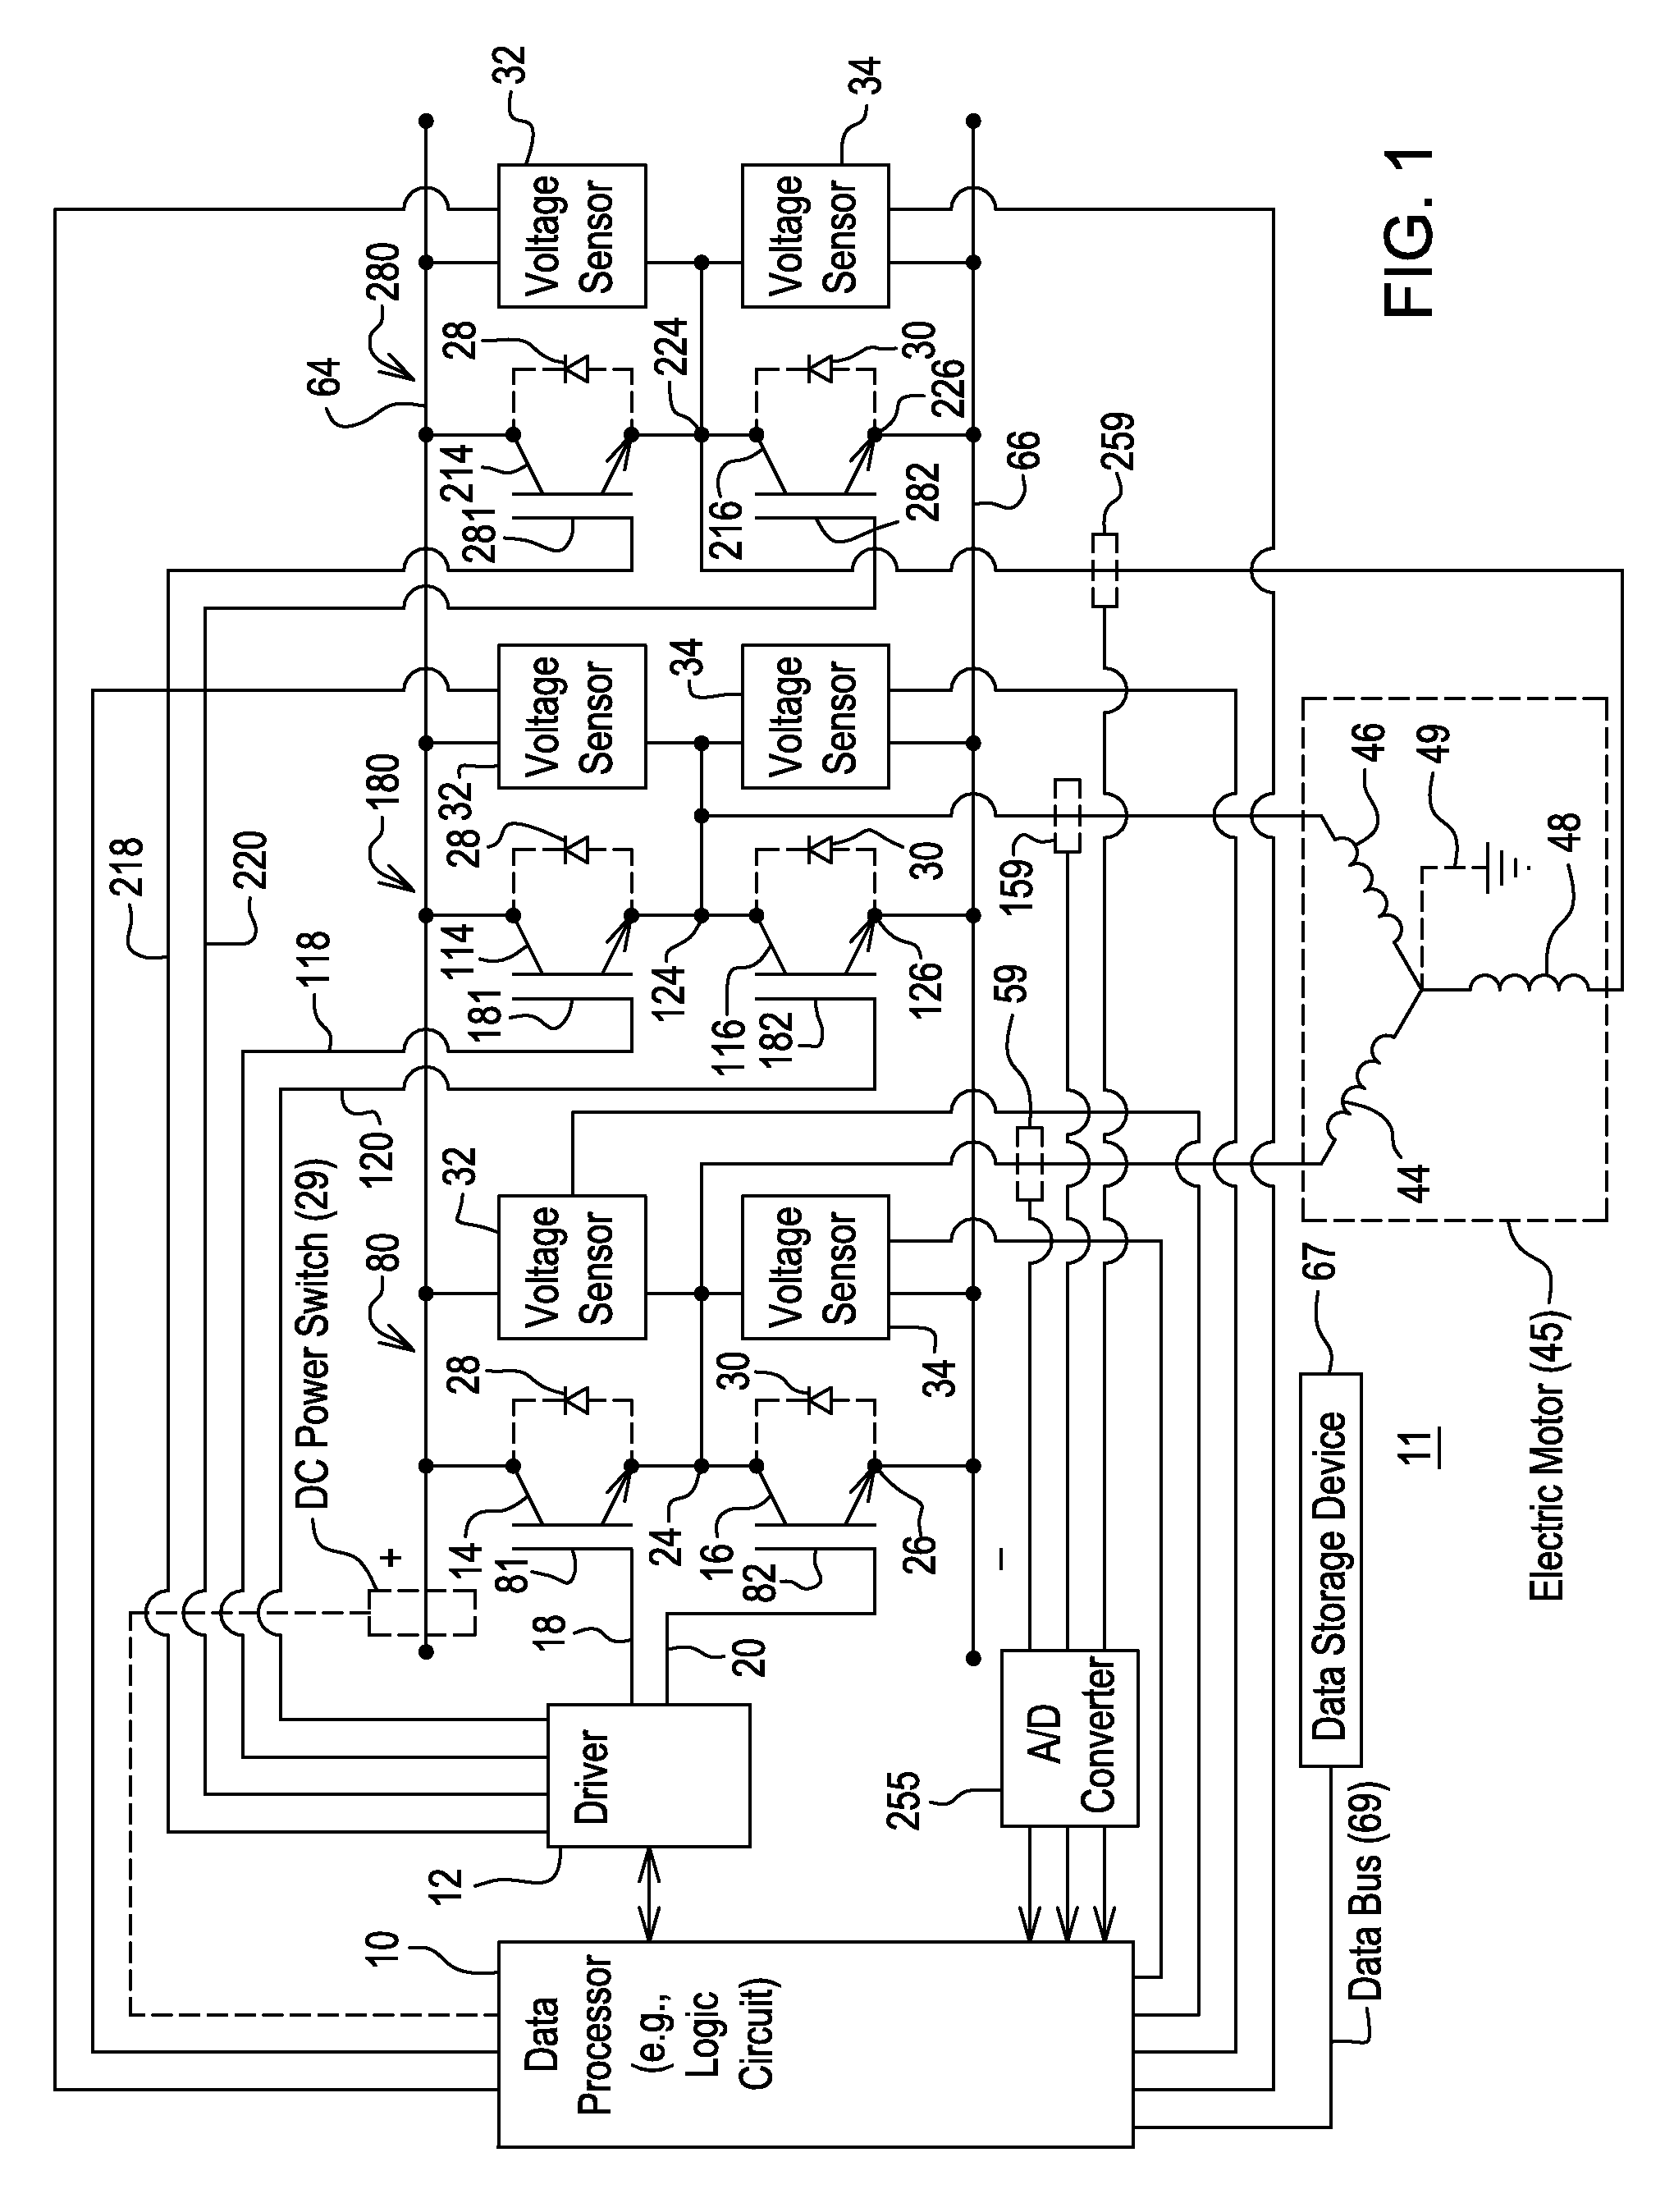 Method and controller for an electric motor with fault detection